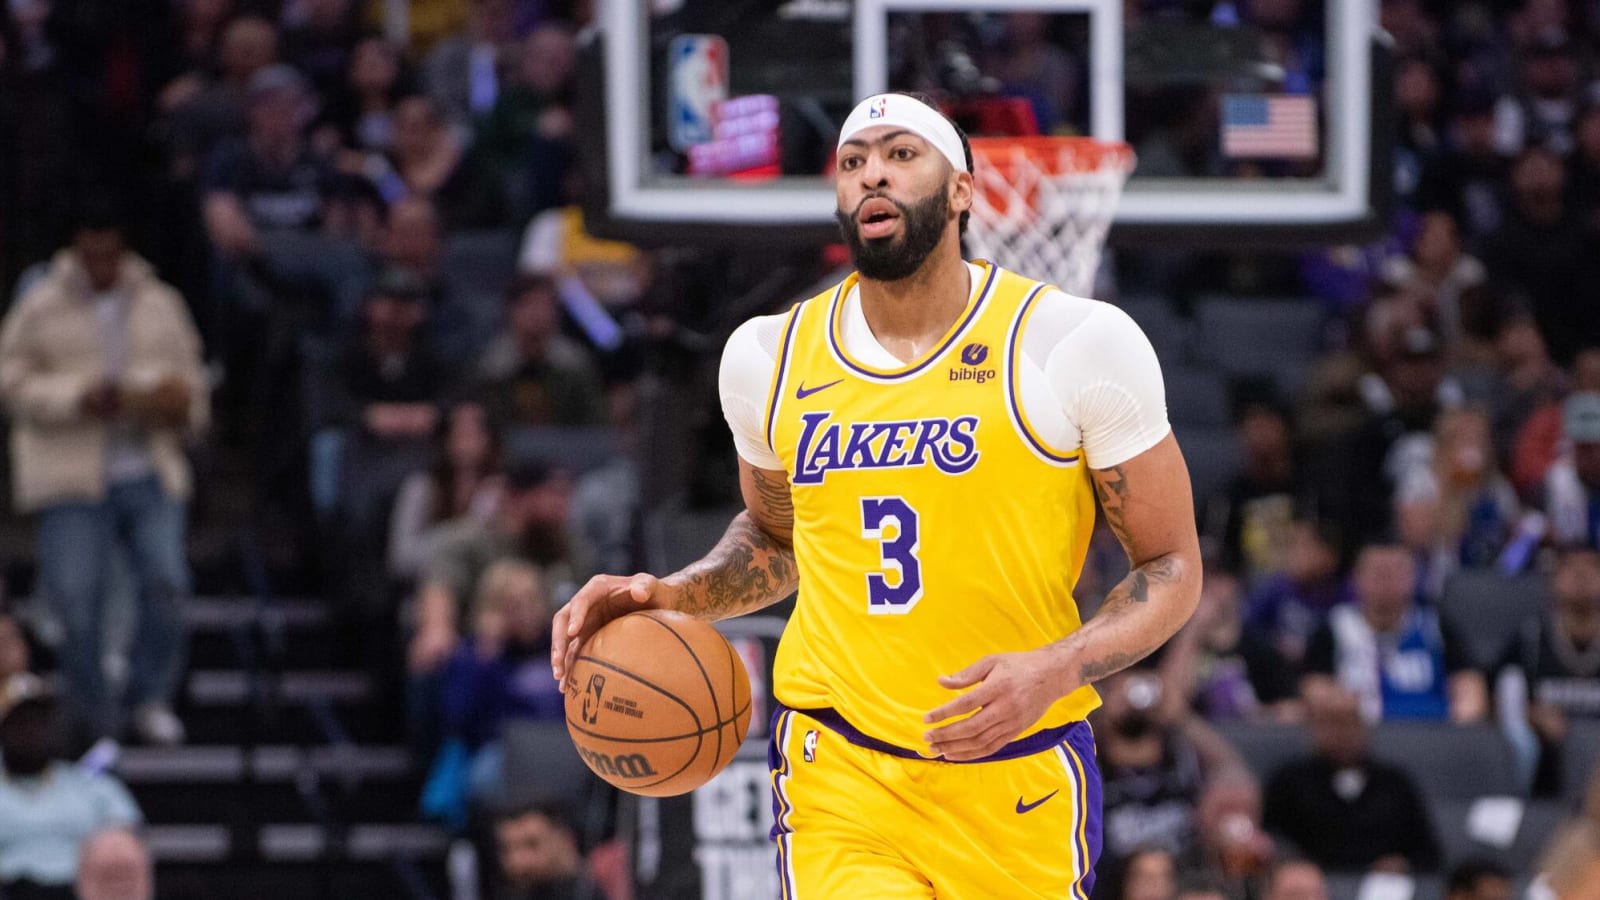 Anthony Davis vs. International centers in NBA: How bad has Lakers’ star struggled against Sabonis, Jokic, and Embiid?